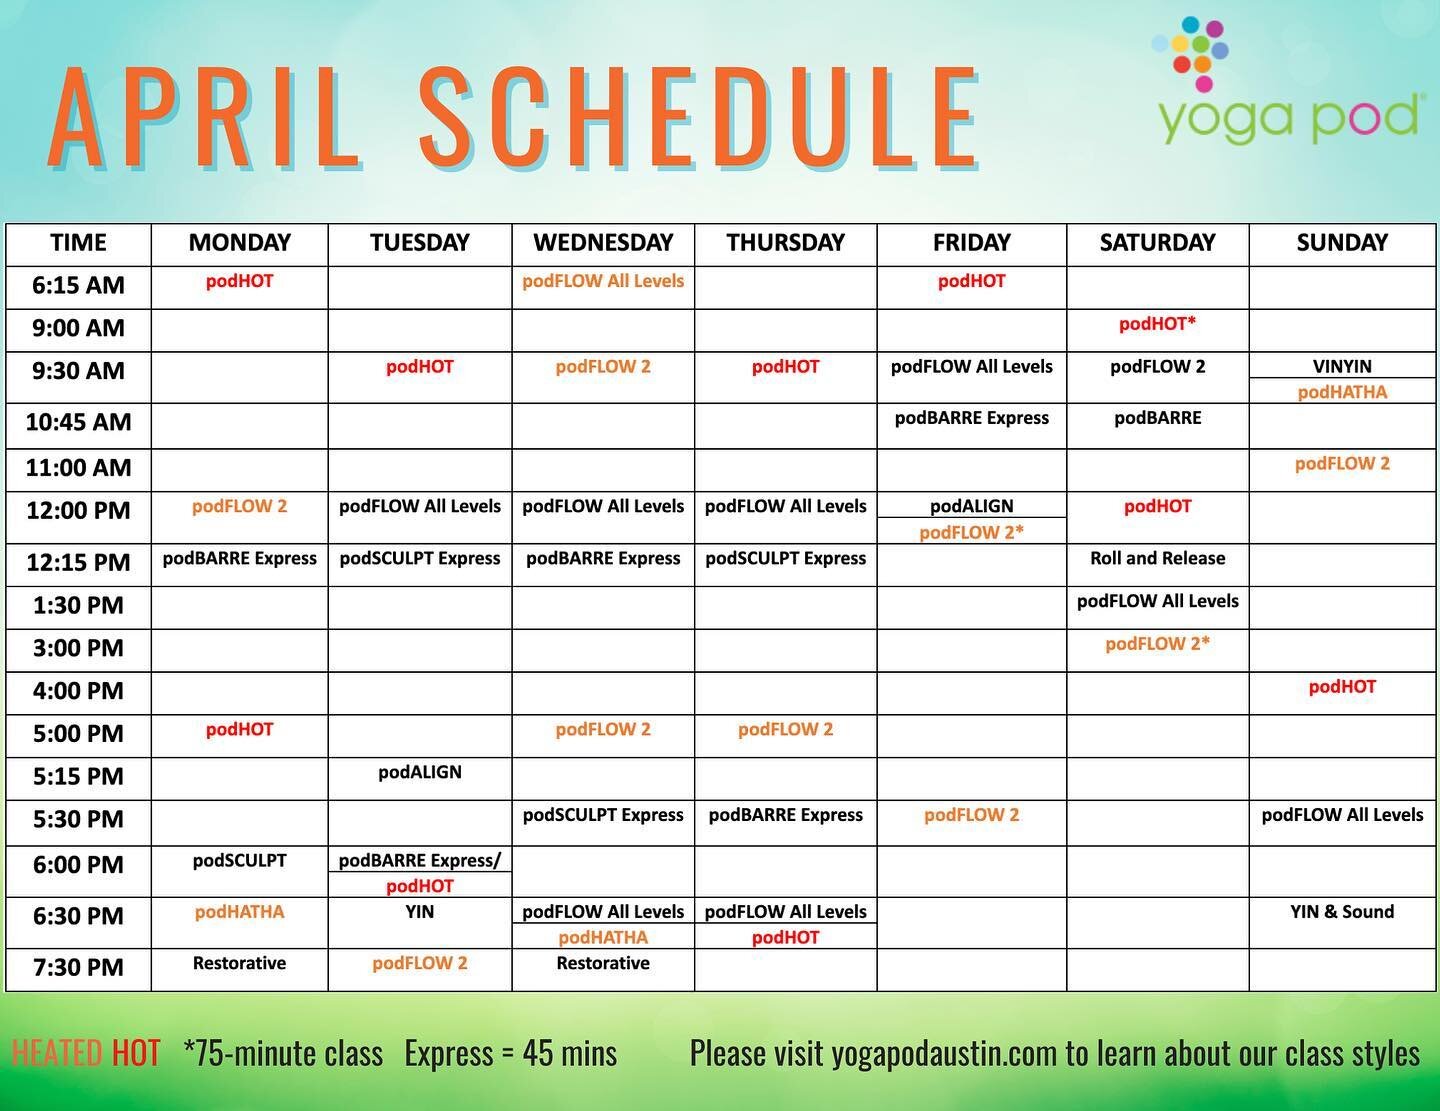 Our April schedule is rolling out on Monday!🤩 Be sure to look out for some tweaks &amp; time changes😇

Come try our new hybrid class, podHATHA, for the month of April! This class is a special blend of our popular podHOT and podFLOW All Levels. Let 